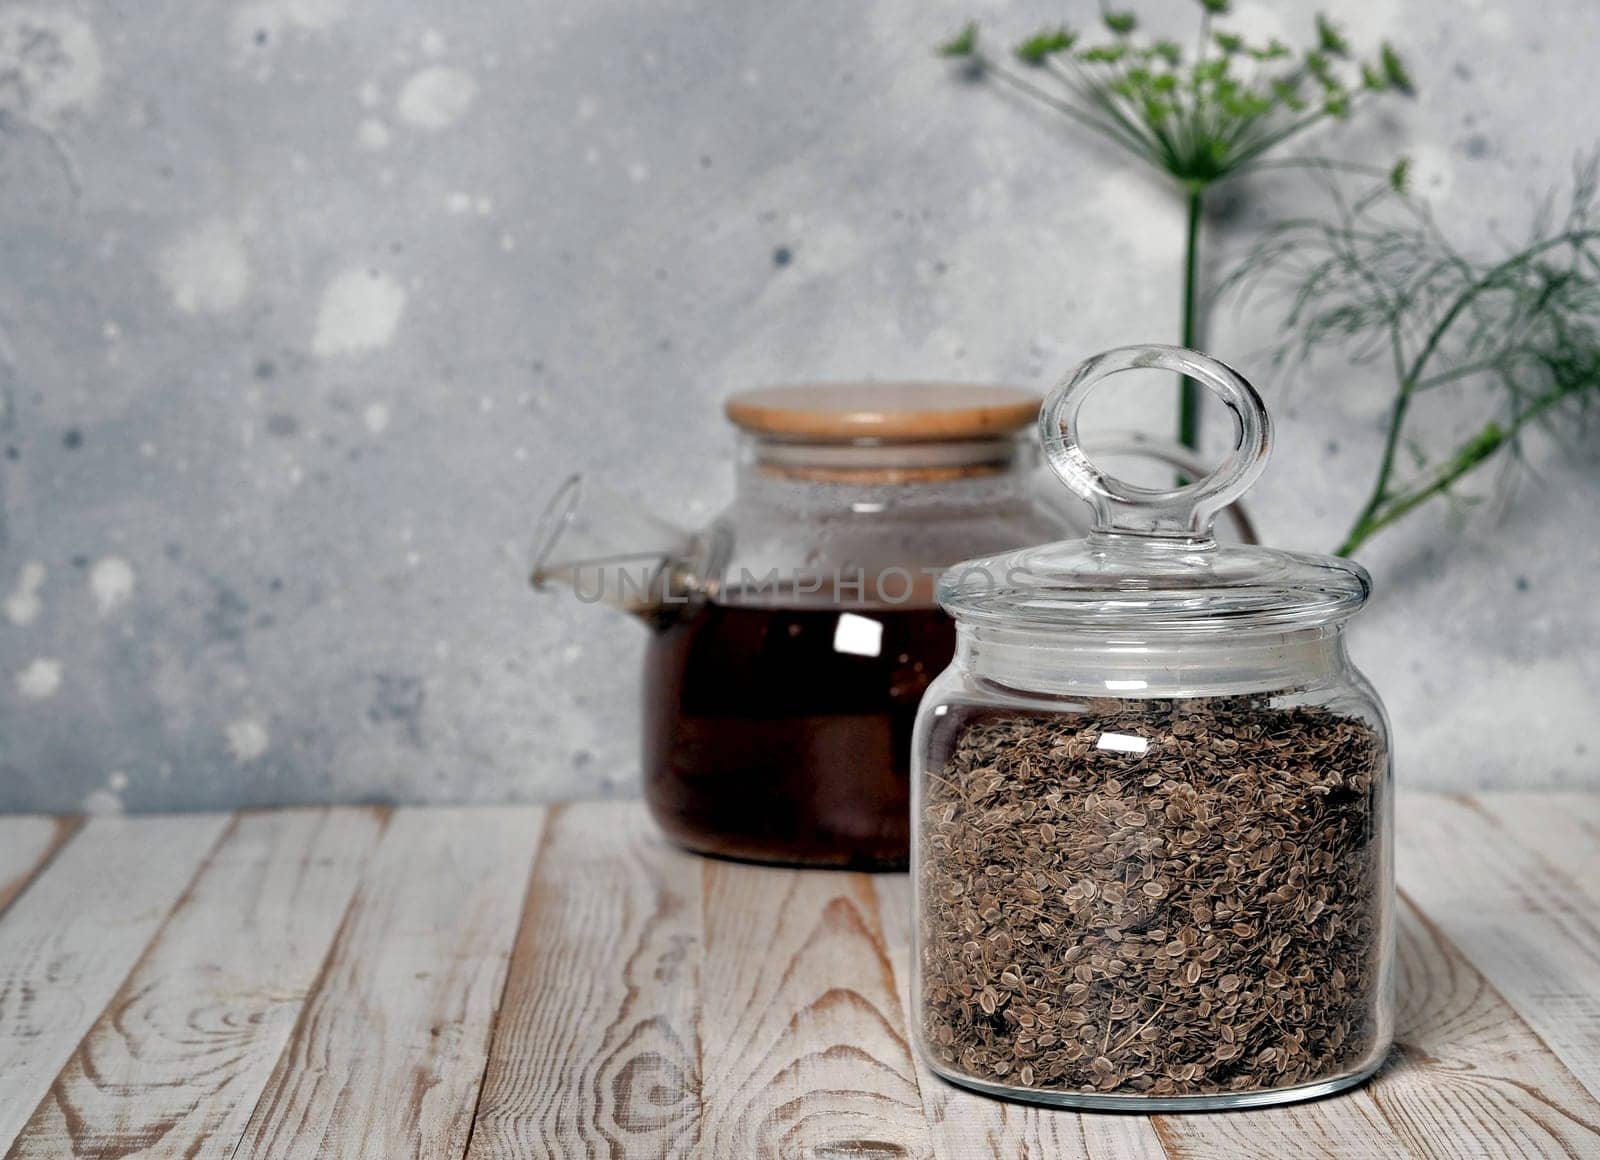 Dried seeds in a glass jar on the background of a teapot with tea on a natural wooden table. The concept of dried healthy herbs